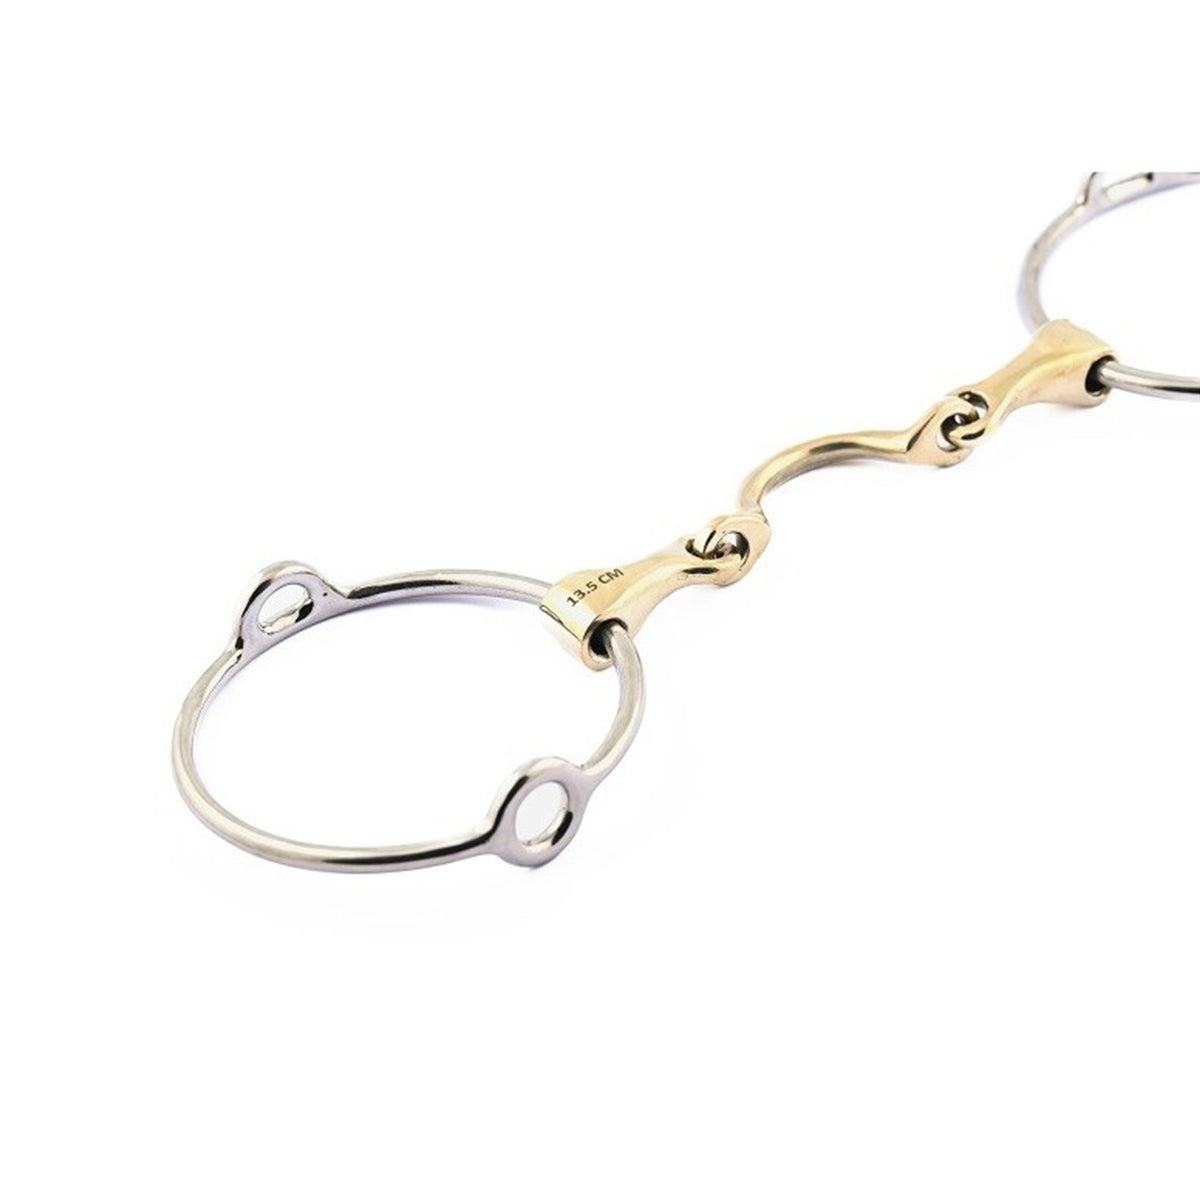 Jump'in Large Ring Gag Bit With High Port